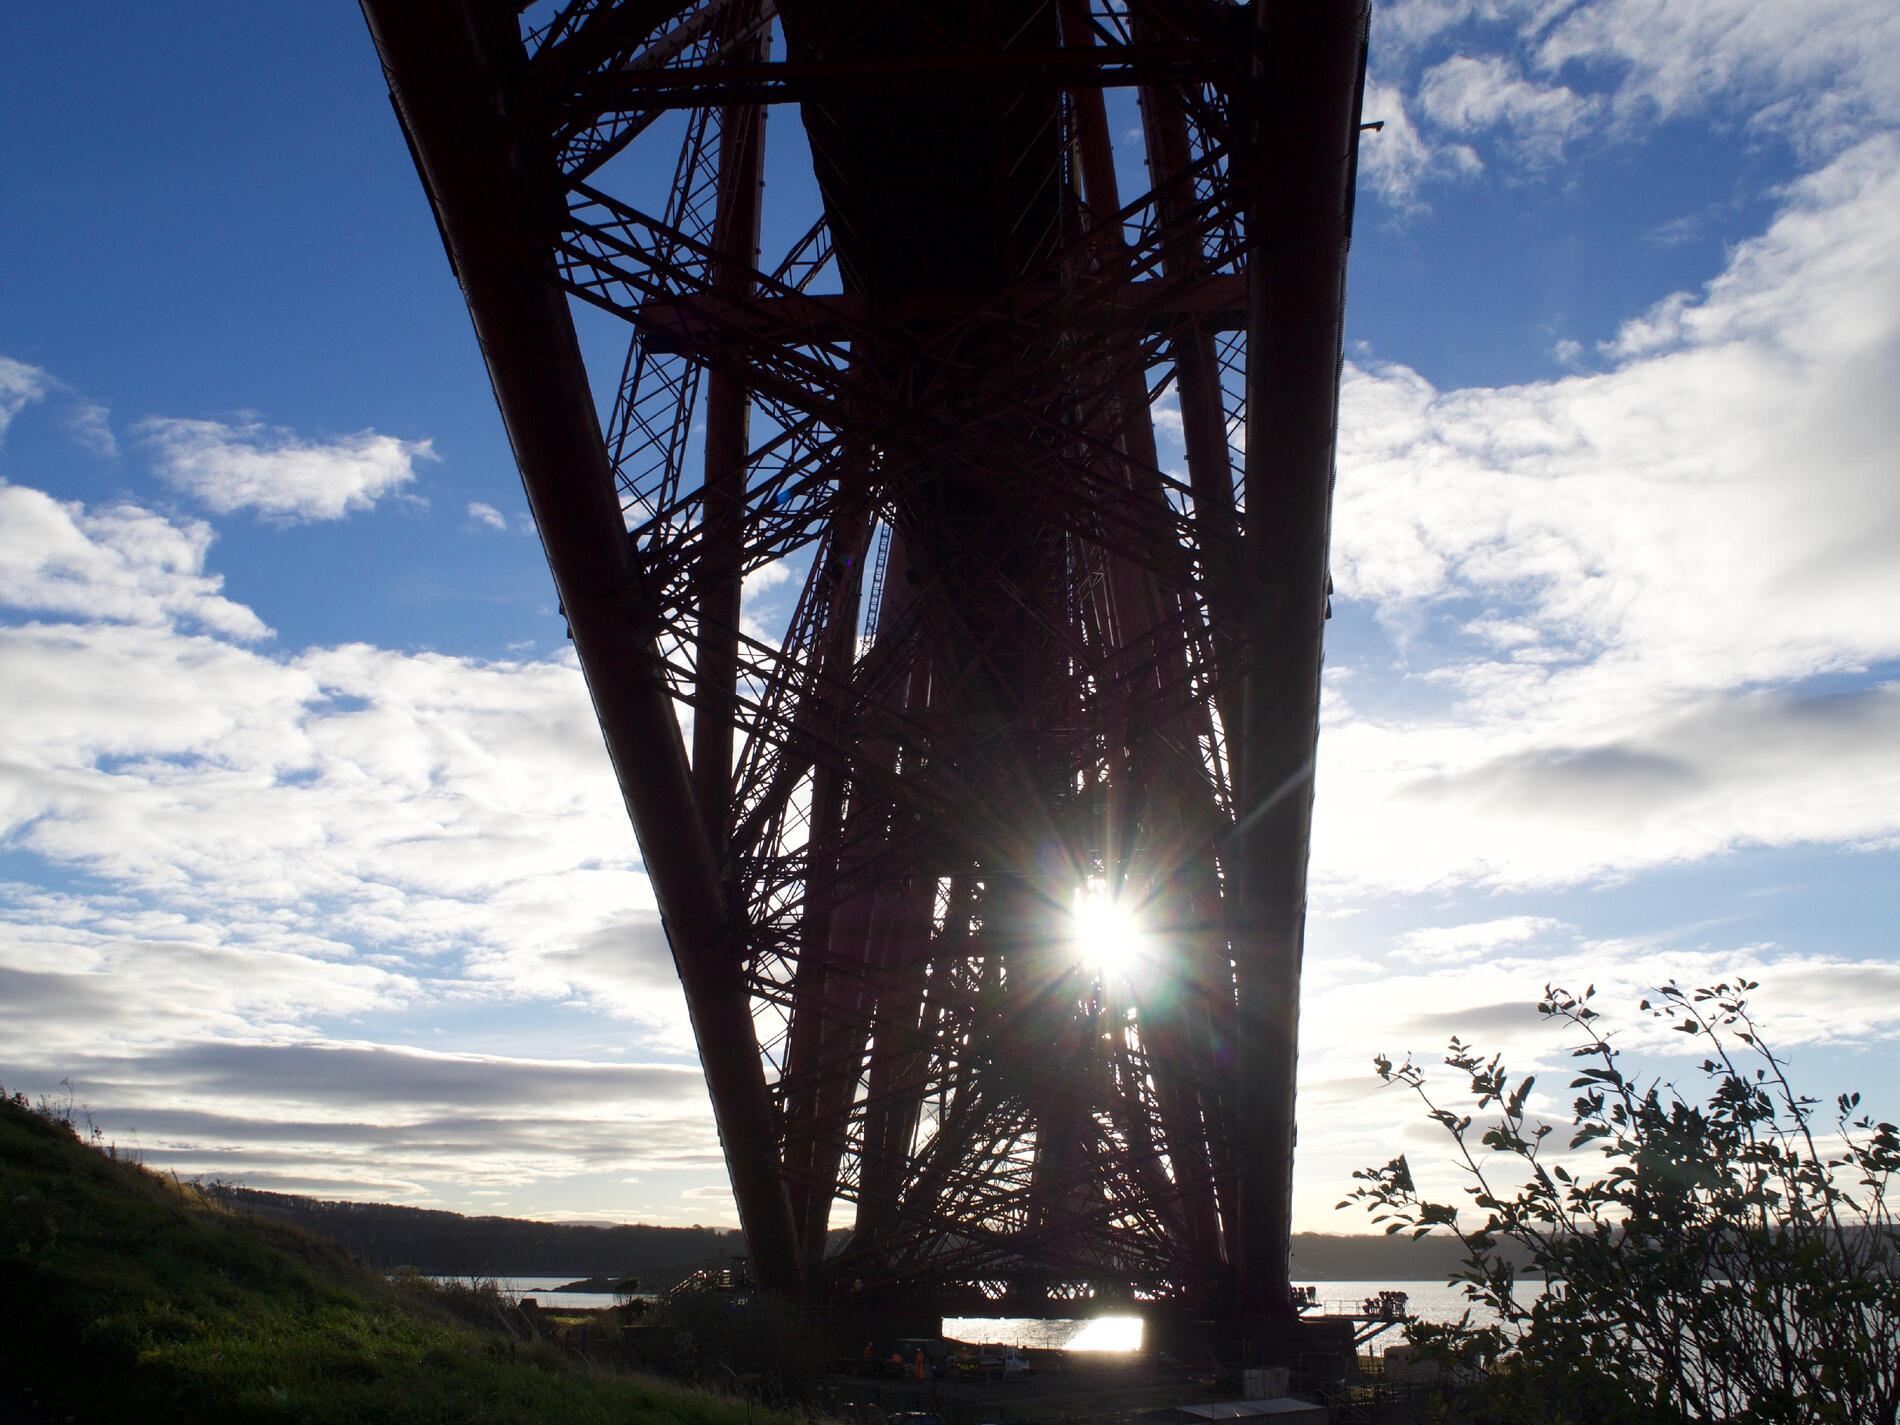 A silhouette of the girders in the bridge, looking up from underneath.